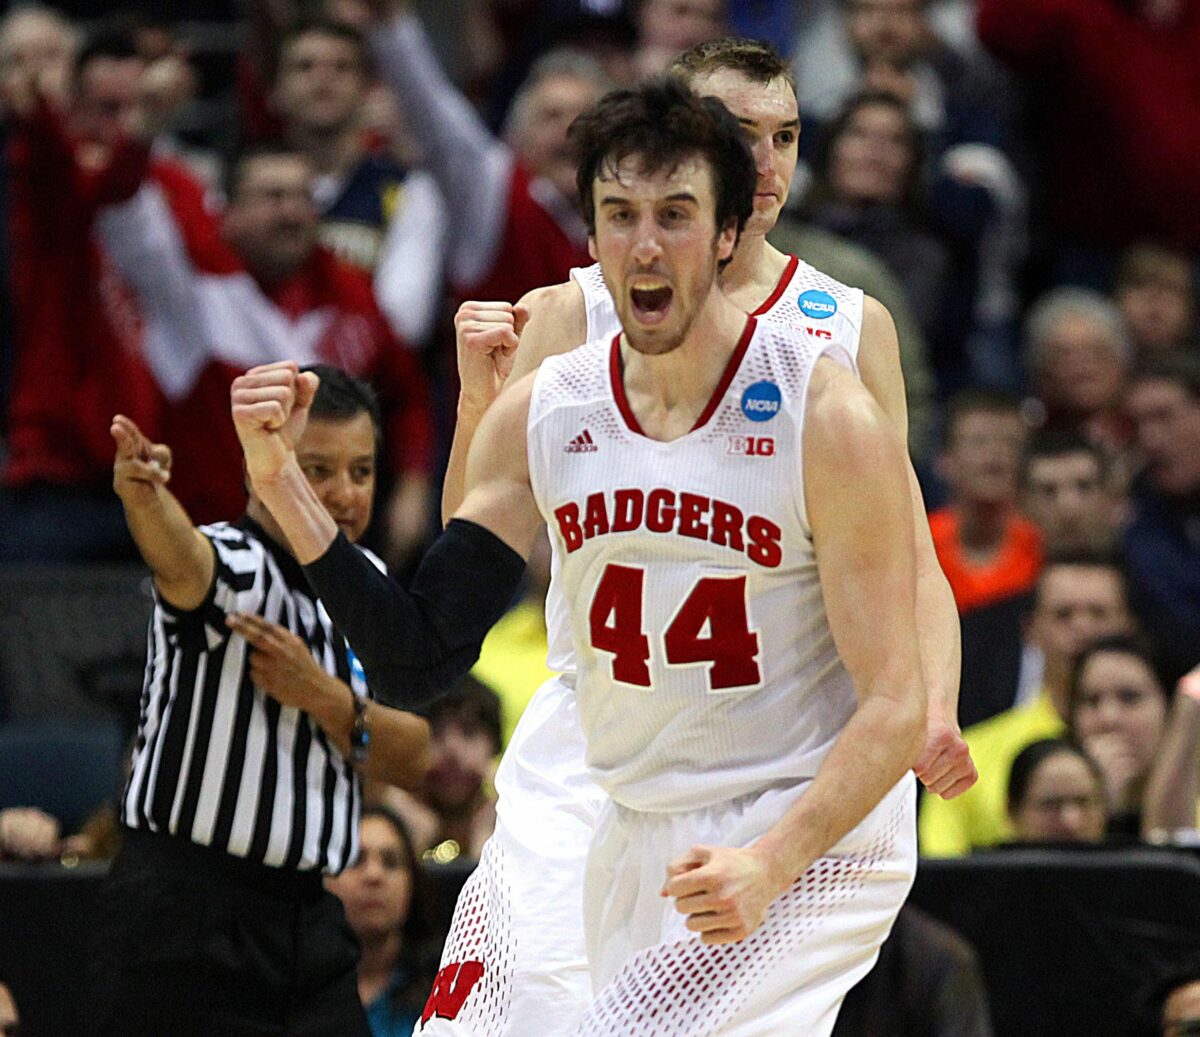 WATCH: The Wisconsin basketball game none of us will forget